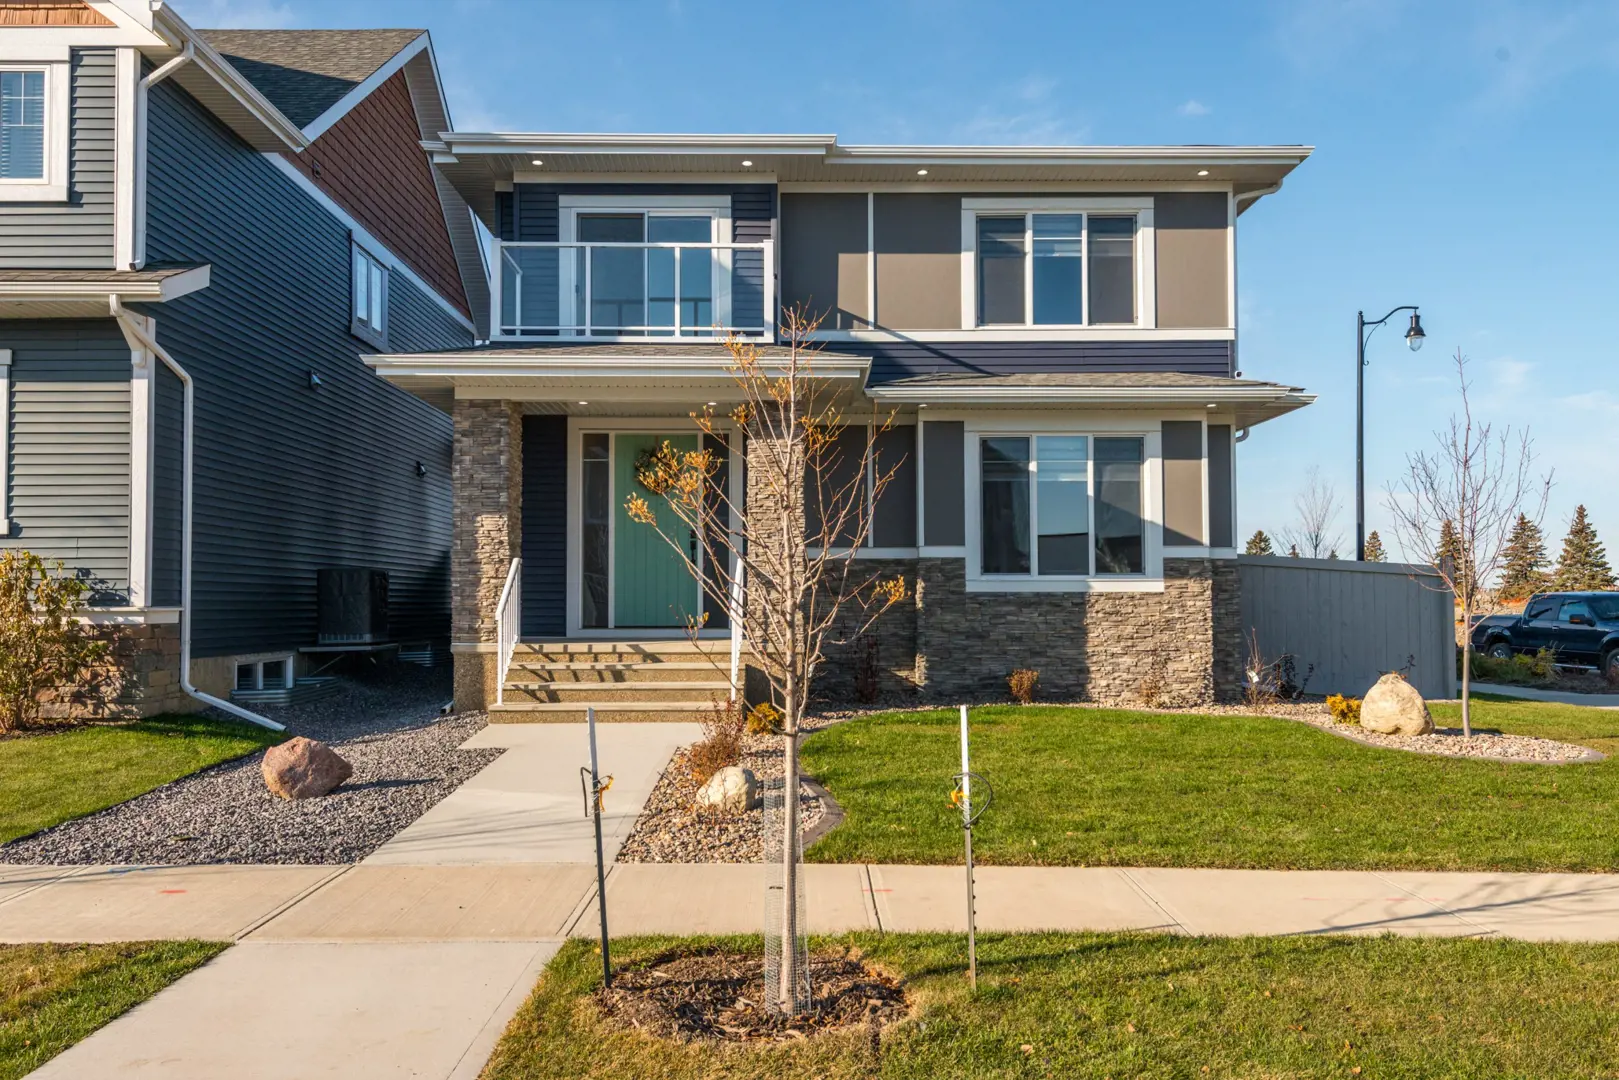 Village at Griesbach by Art Homes located at Village at Griesbach Community  | 5144 Corvette Street Northwest,  Edmonton,   AB image